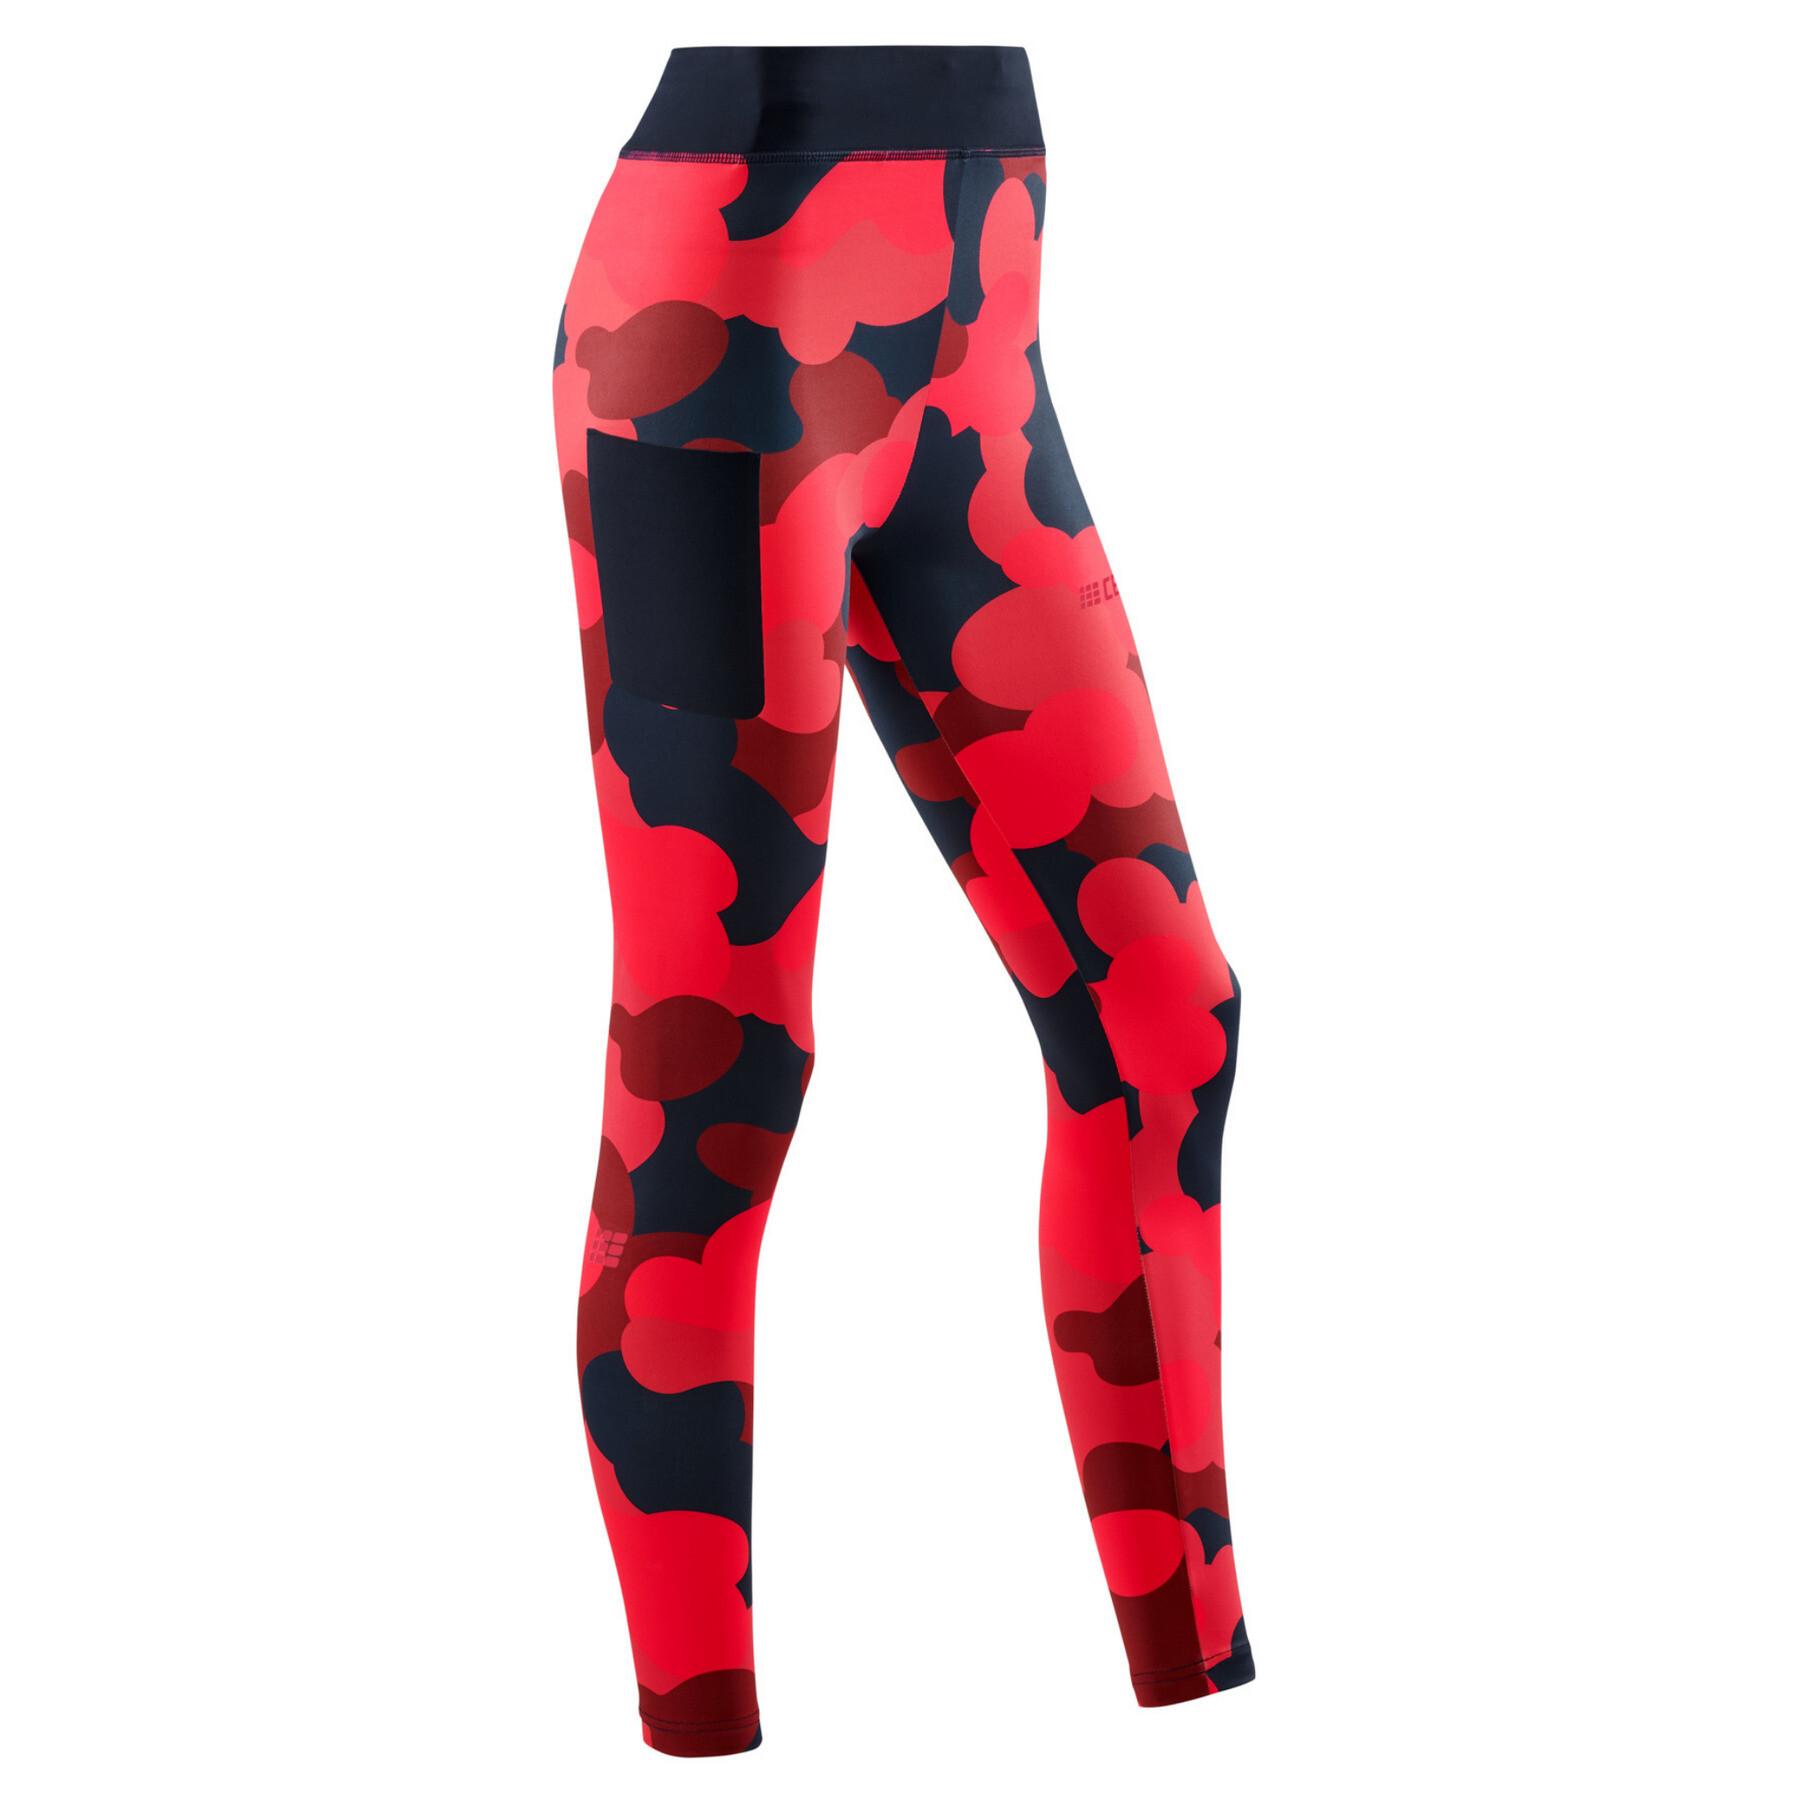 Legging woman CEP Compression Camocloud - Baselayers - Women's